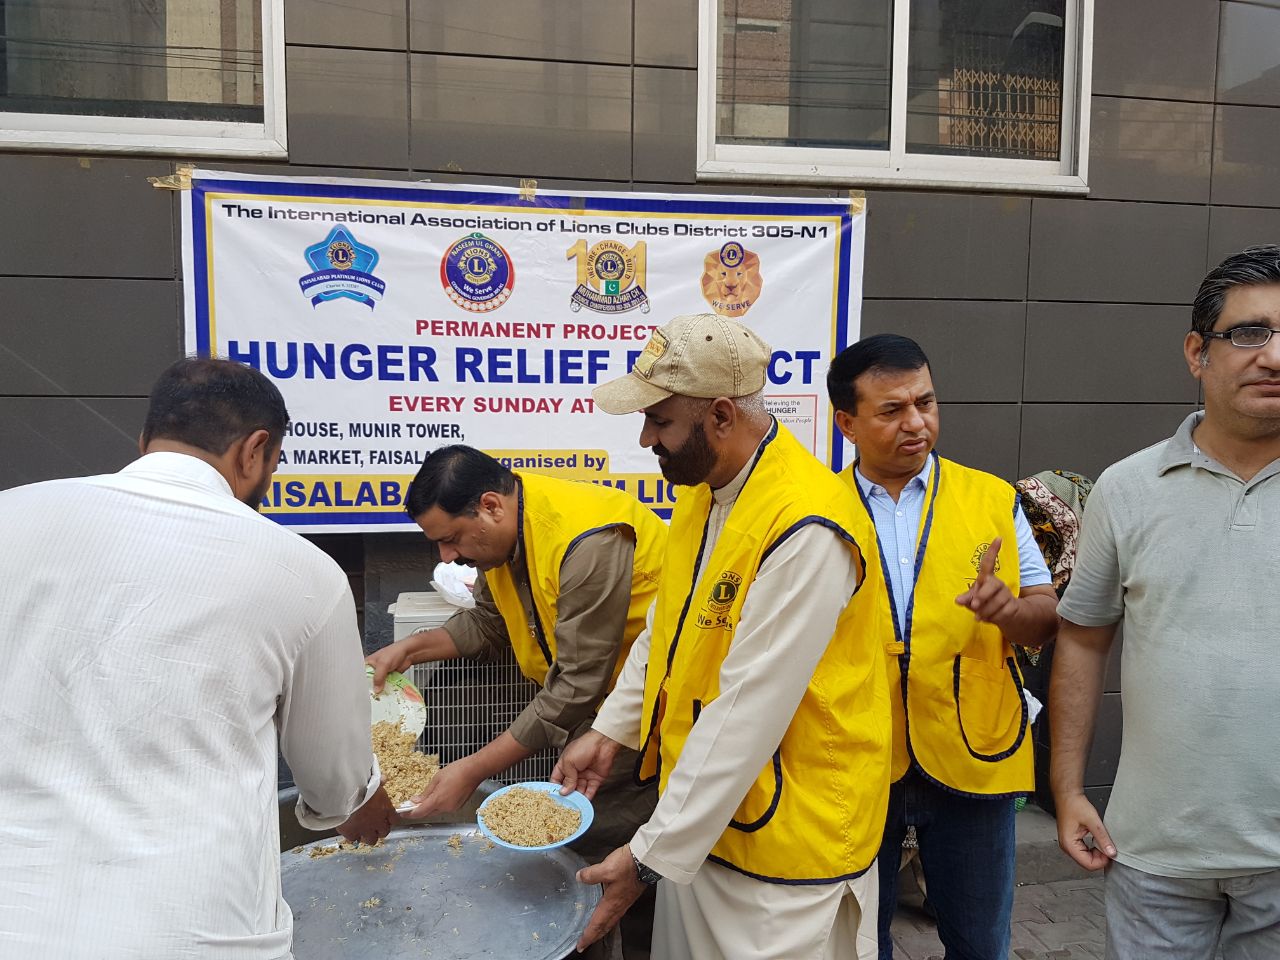 HUNGER RELIEF PROJEC